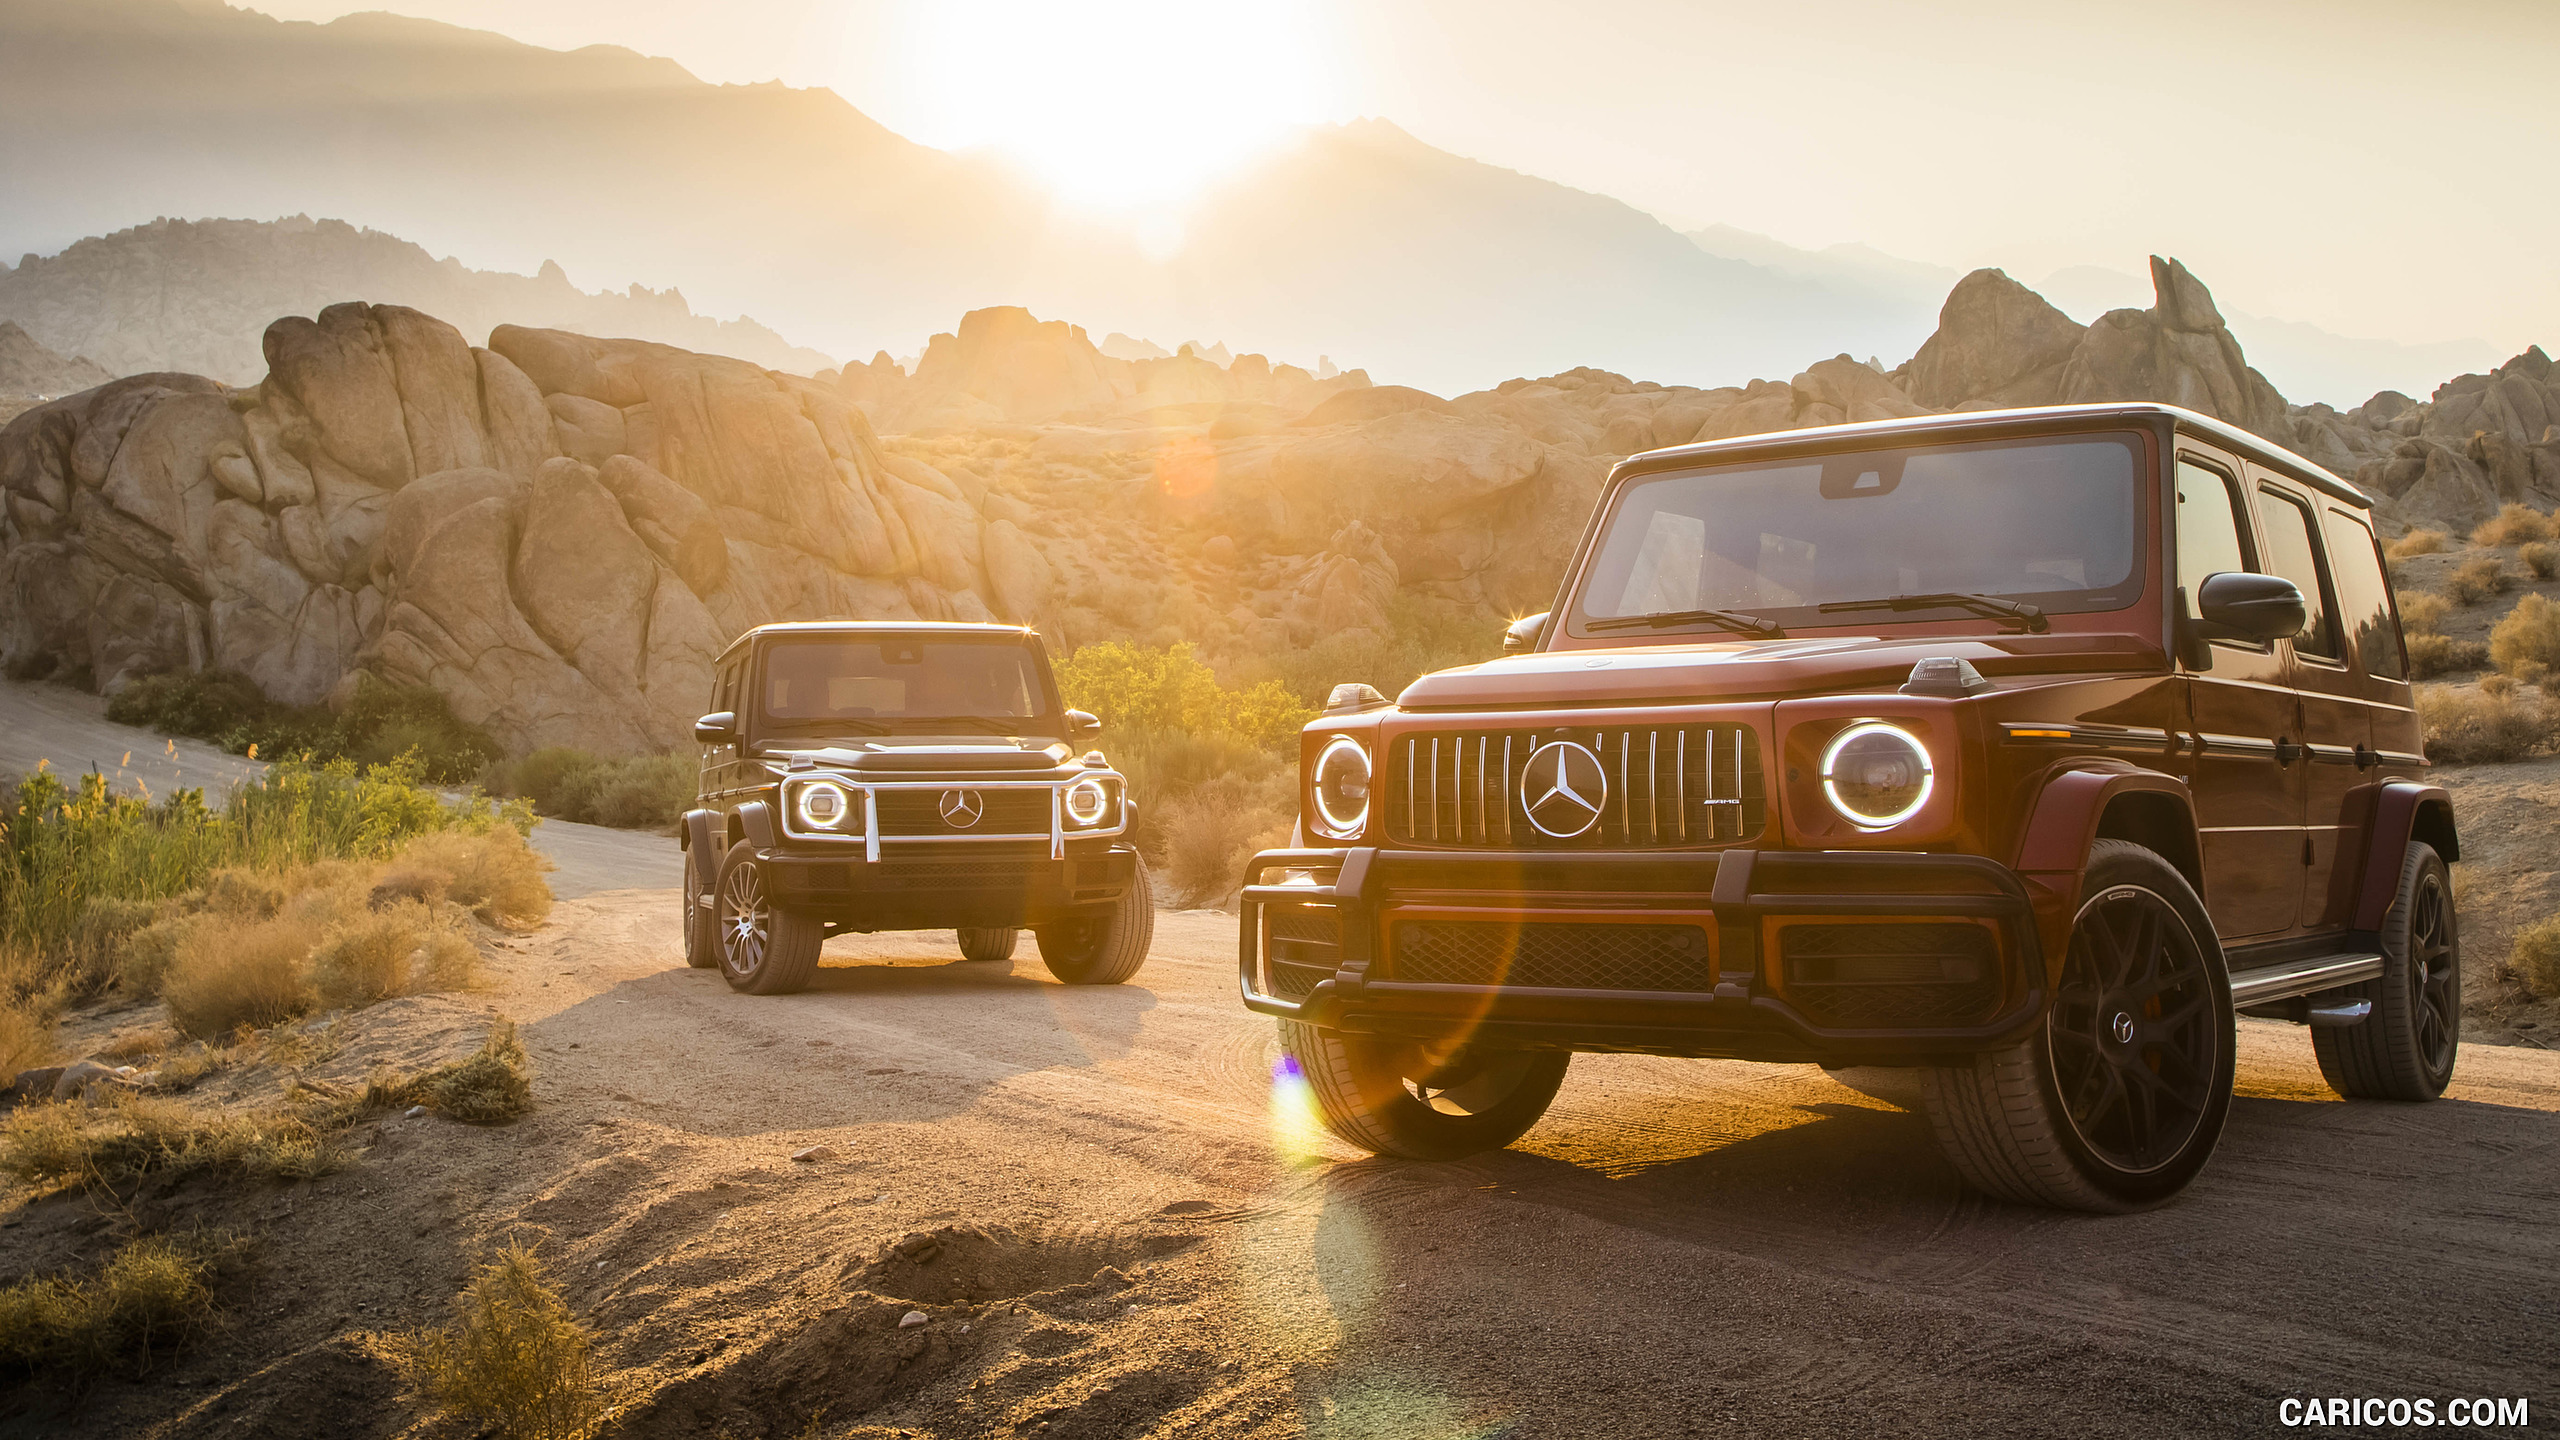 2019 Mercedes-AMG G63 (U.S.-Spec) and 2019 G550, #347 of 452